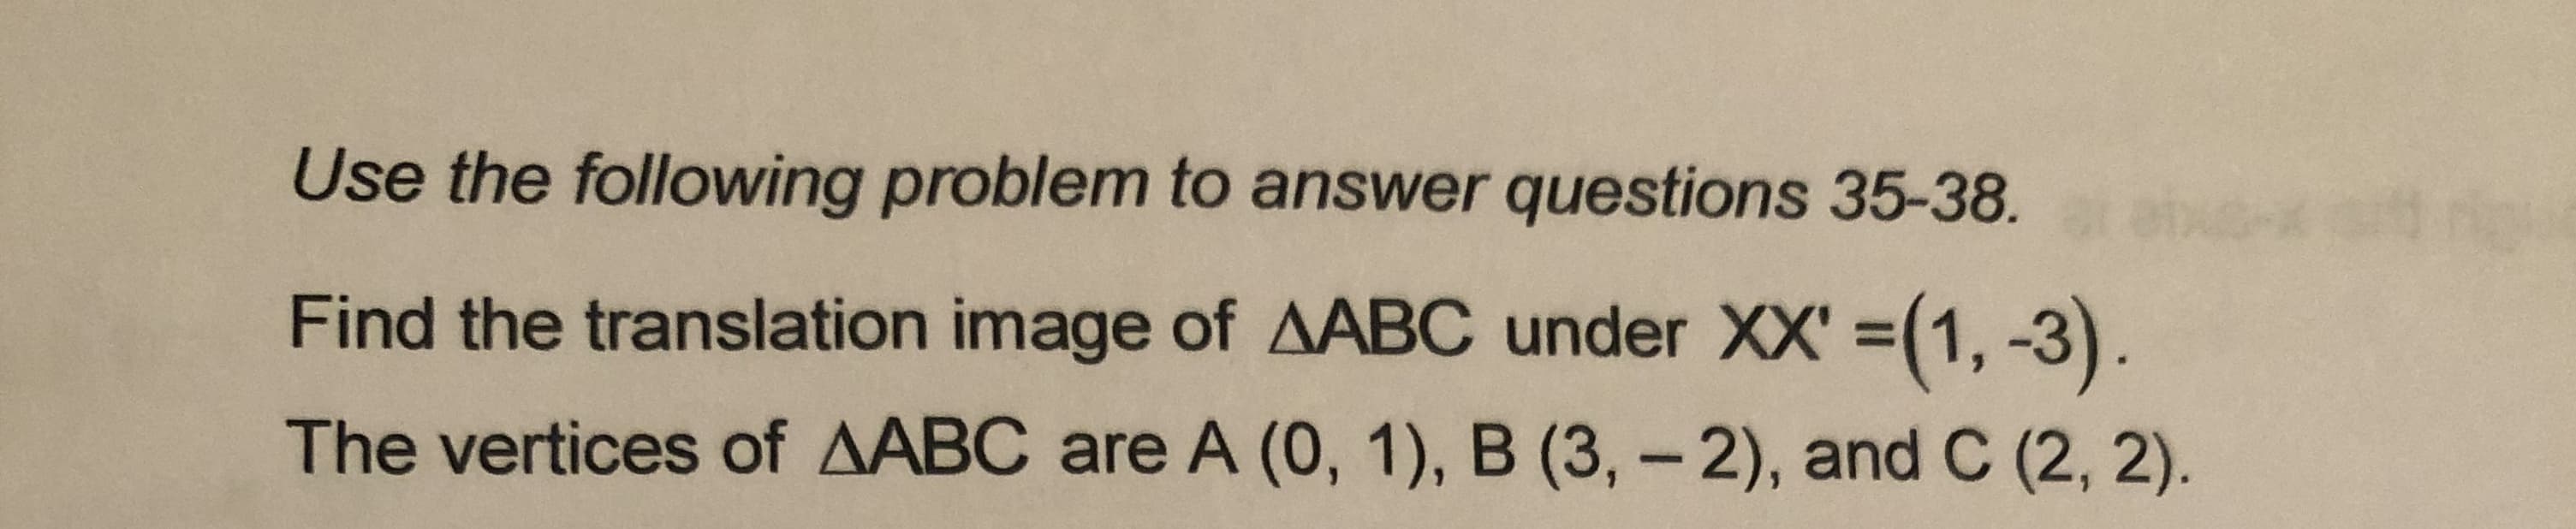 Use the following problem to answer questions 35-38.
Find the translation image of AABC under XX' =(1, -3).
The vertices of AABC are A (0, 1), B (3,-2), and C (2, 2).
